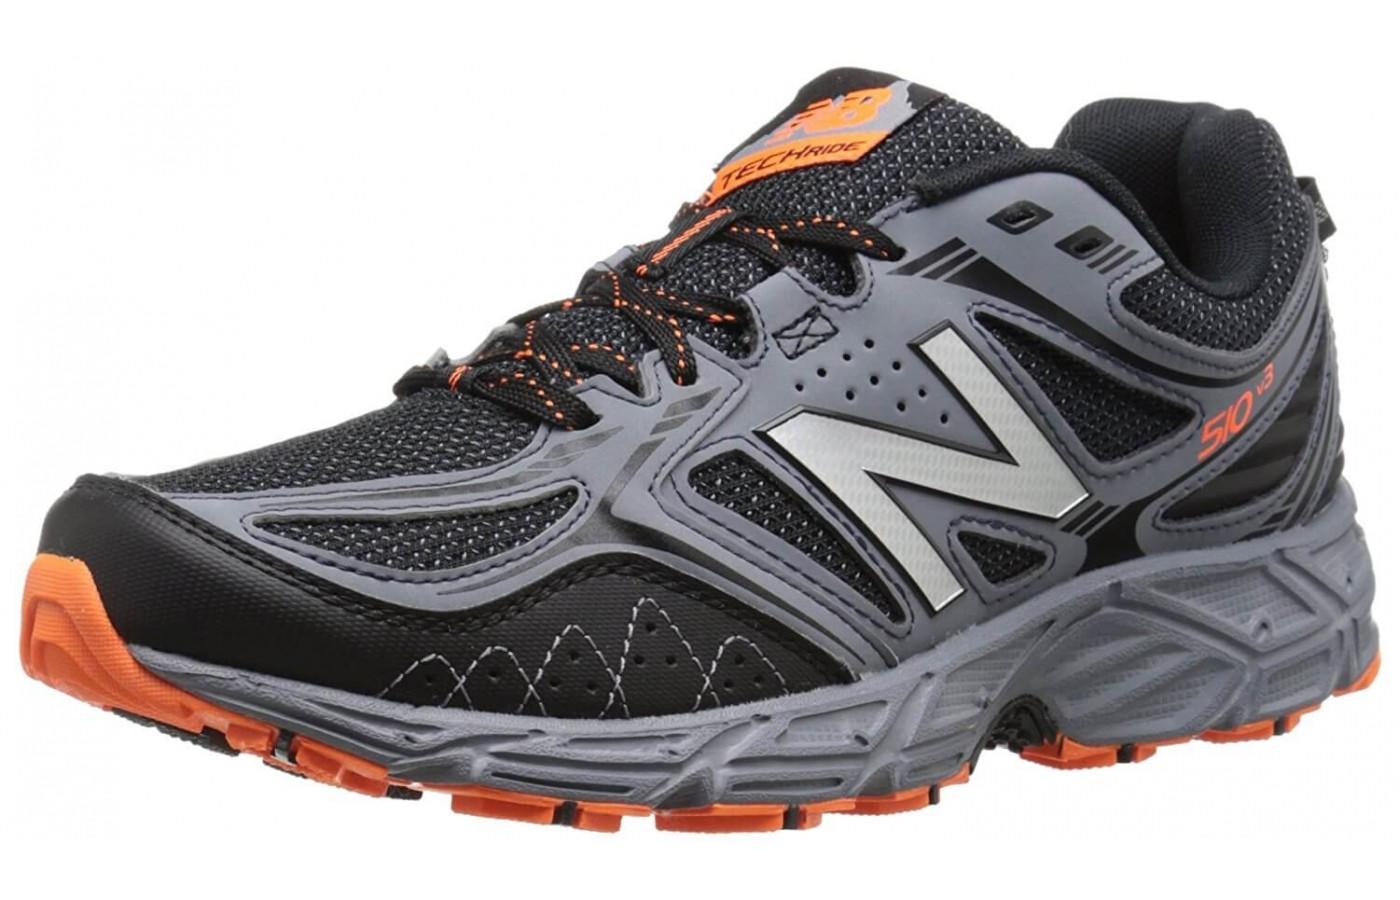 Runners loved the aggressive, rugged look of the New Balance 510v3 Trail. 